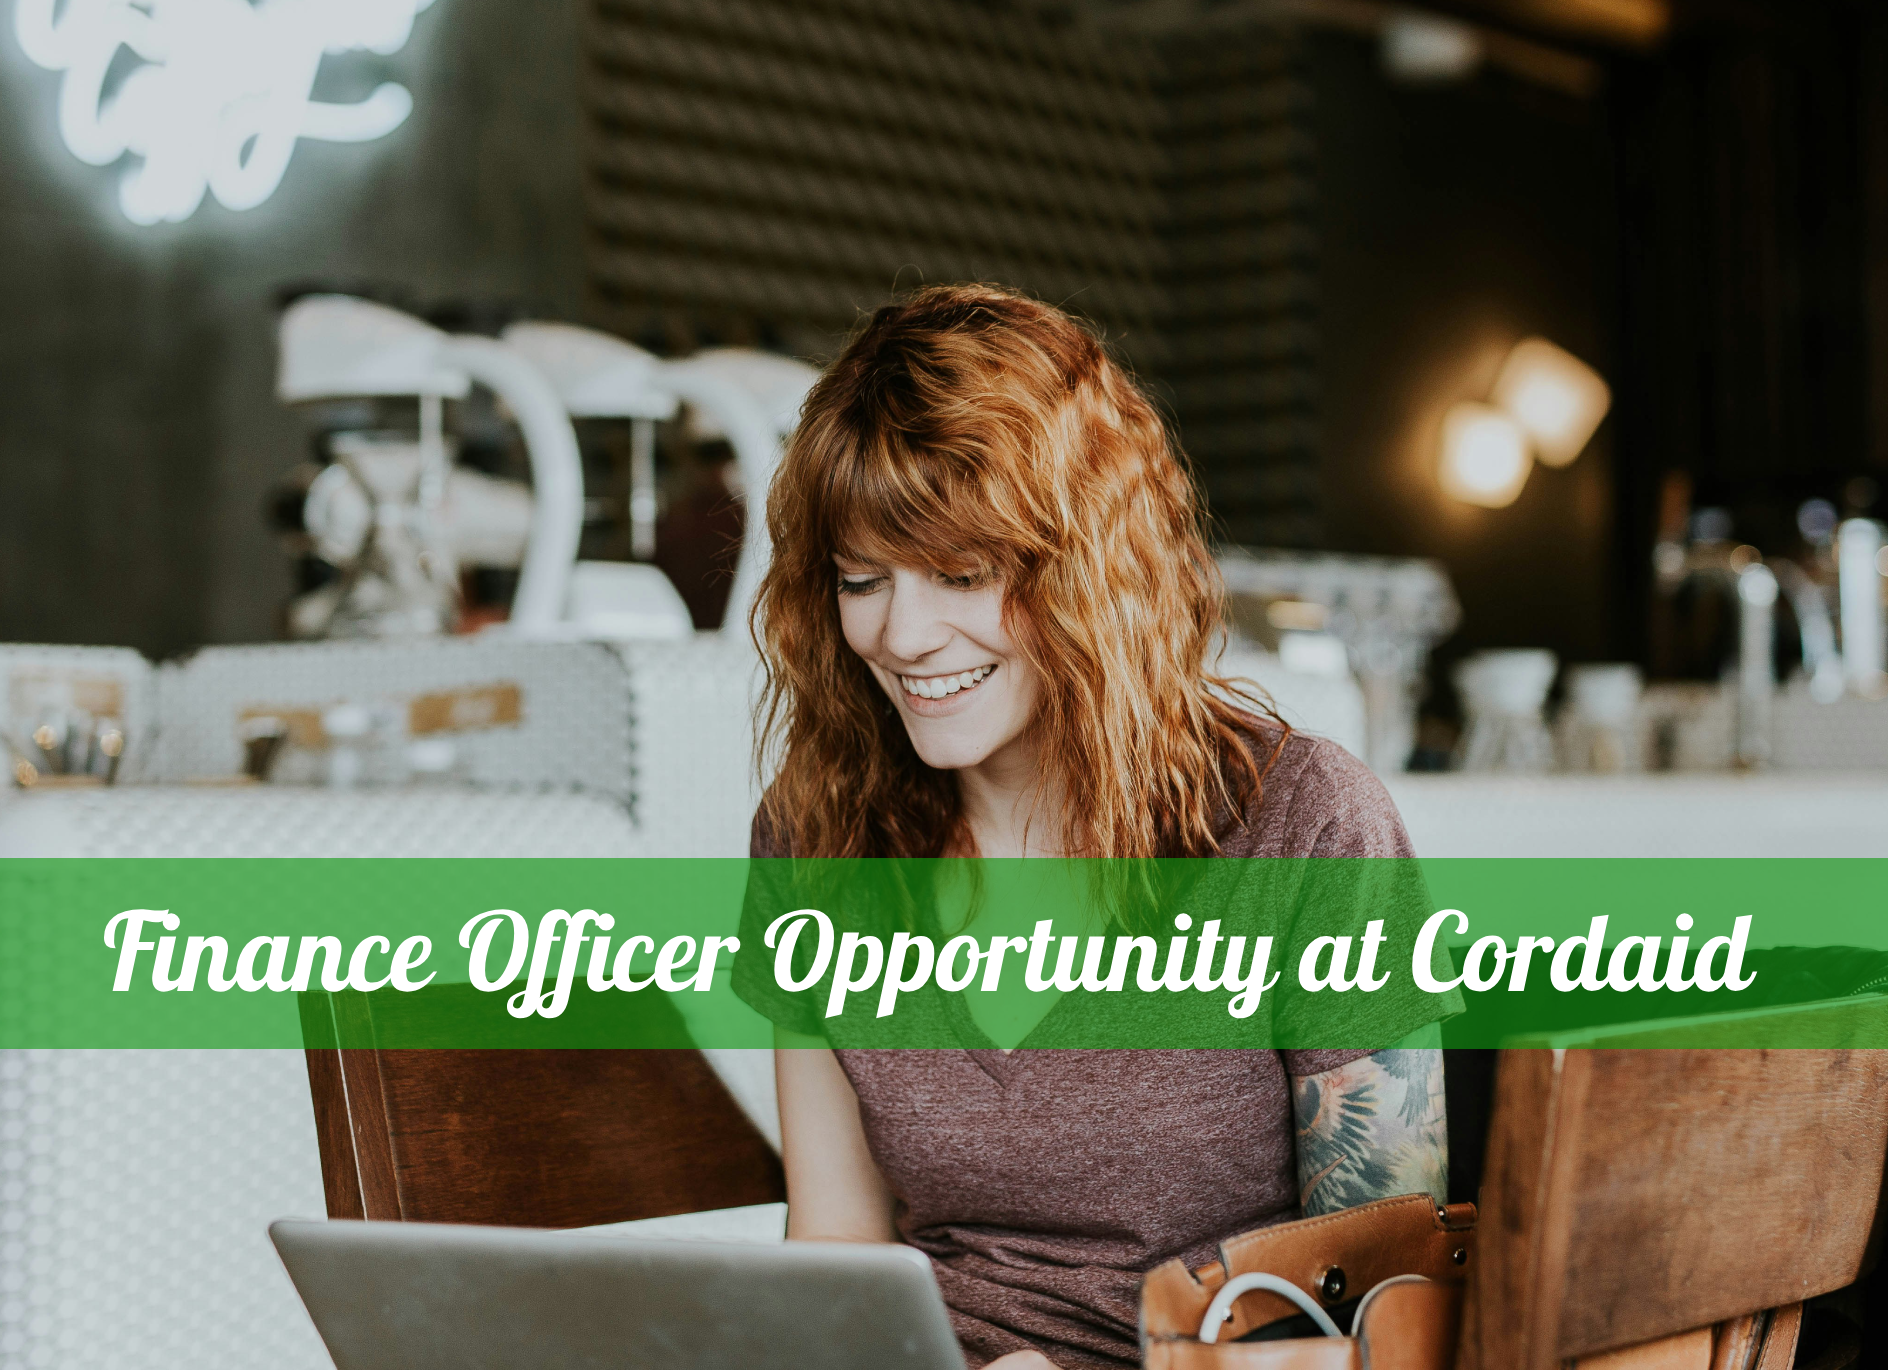 Finance Officer Opportunity at Cordaid: Empowering Fragile Communities